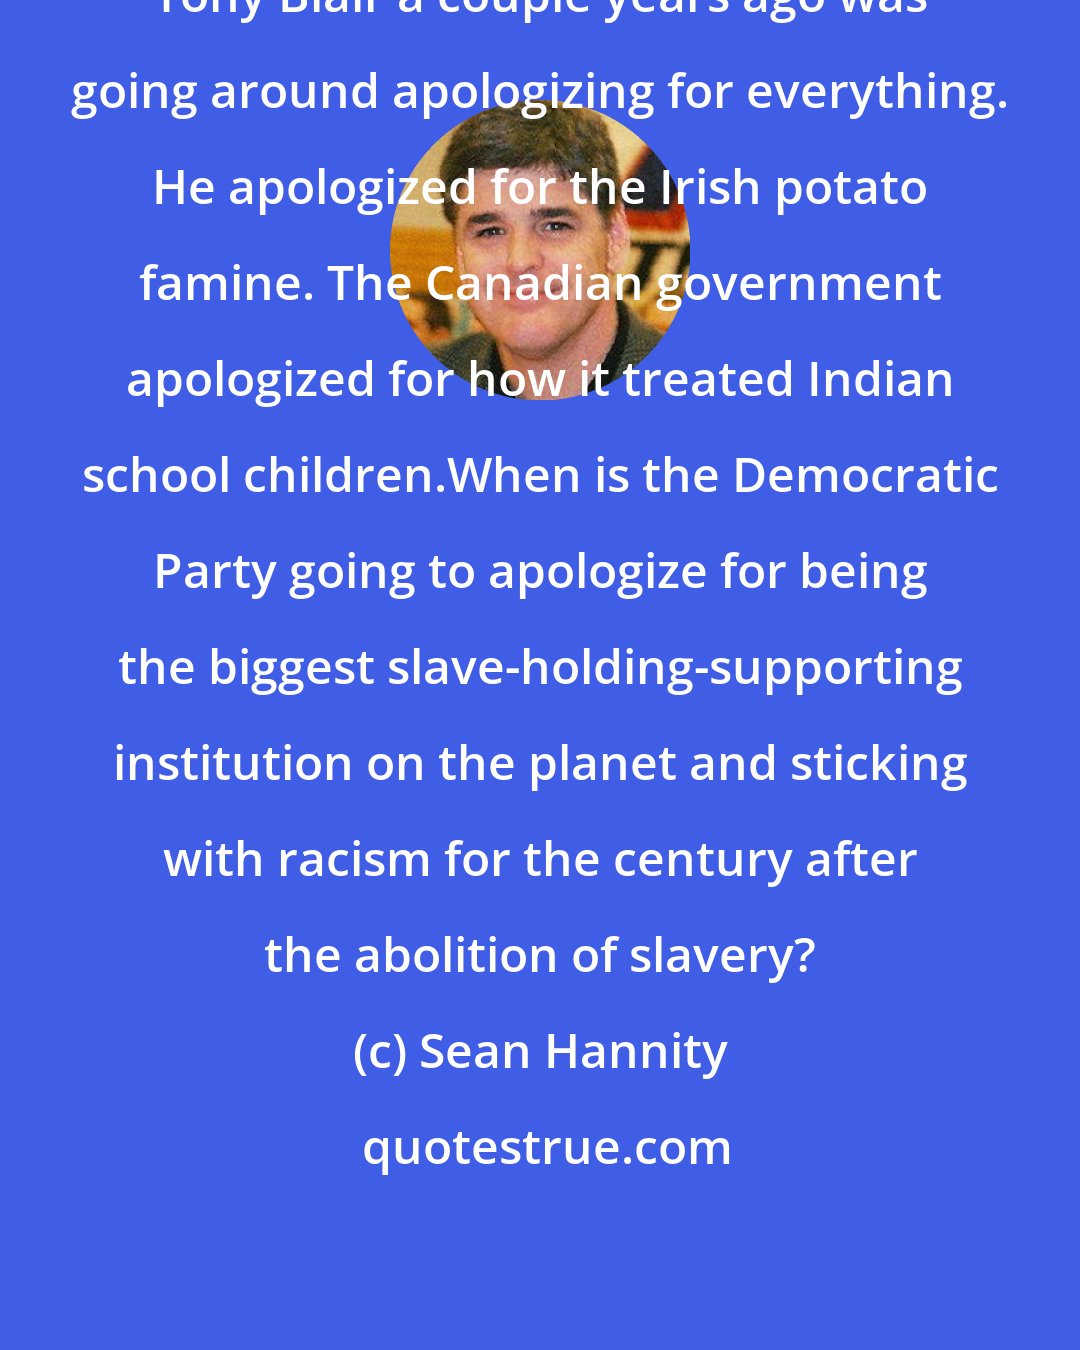 Sean Hannity: Tony Blair a couple years ago was going around apologizing for everything. He apologized for the Irish potato famine. The Canadian government apologized for how it treated Indian school children.When is the Democratic Party going to apologize for being the biggest slave-holding-supporting institution on the planet and sticking with racism for the century after the abolition of slavery?